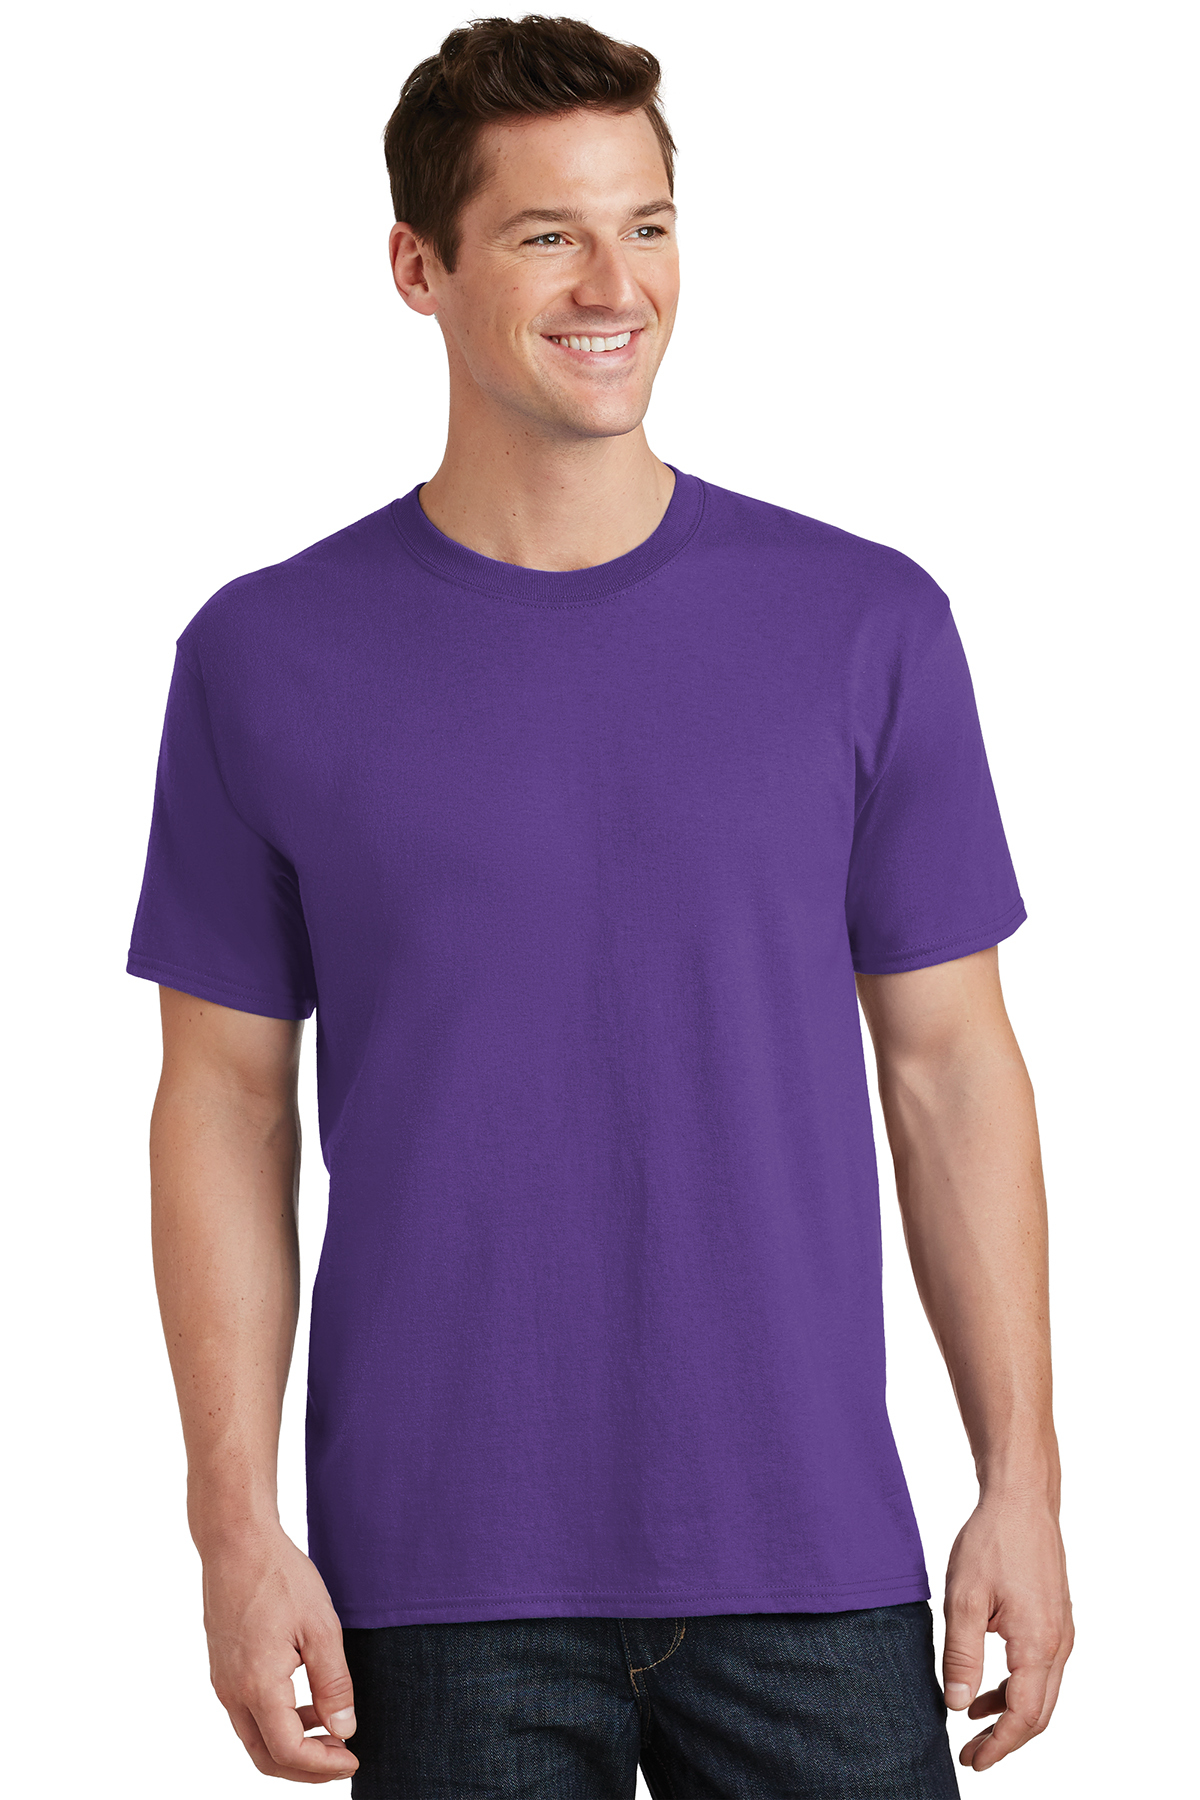 click to view Team Purple